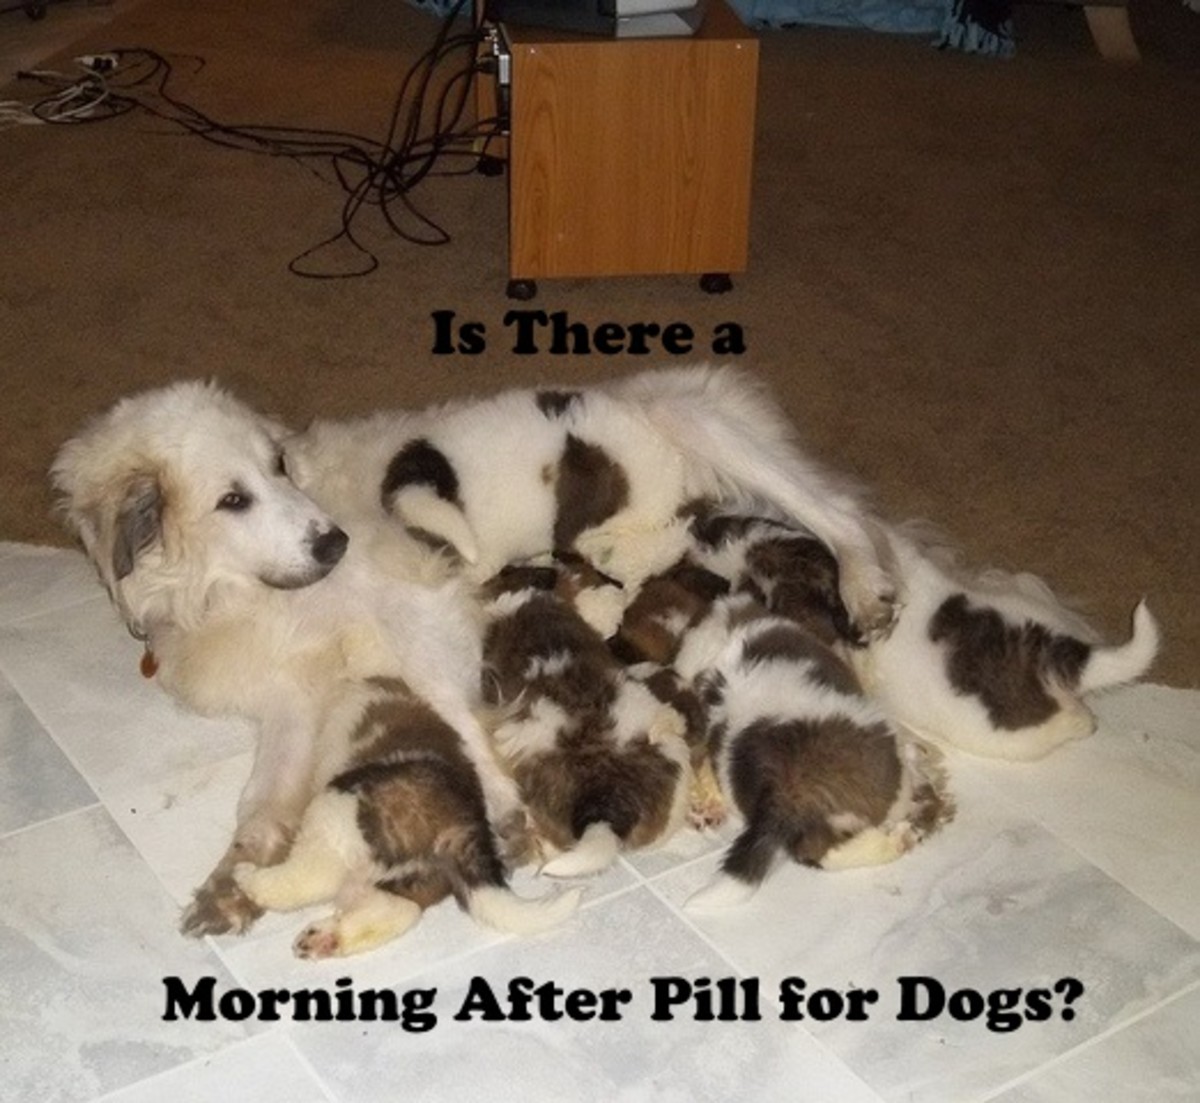 Morning After Pill Available for Dogs